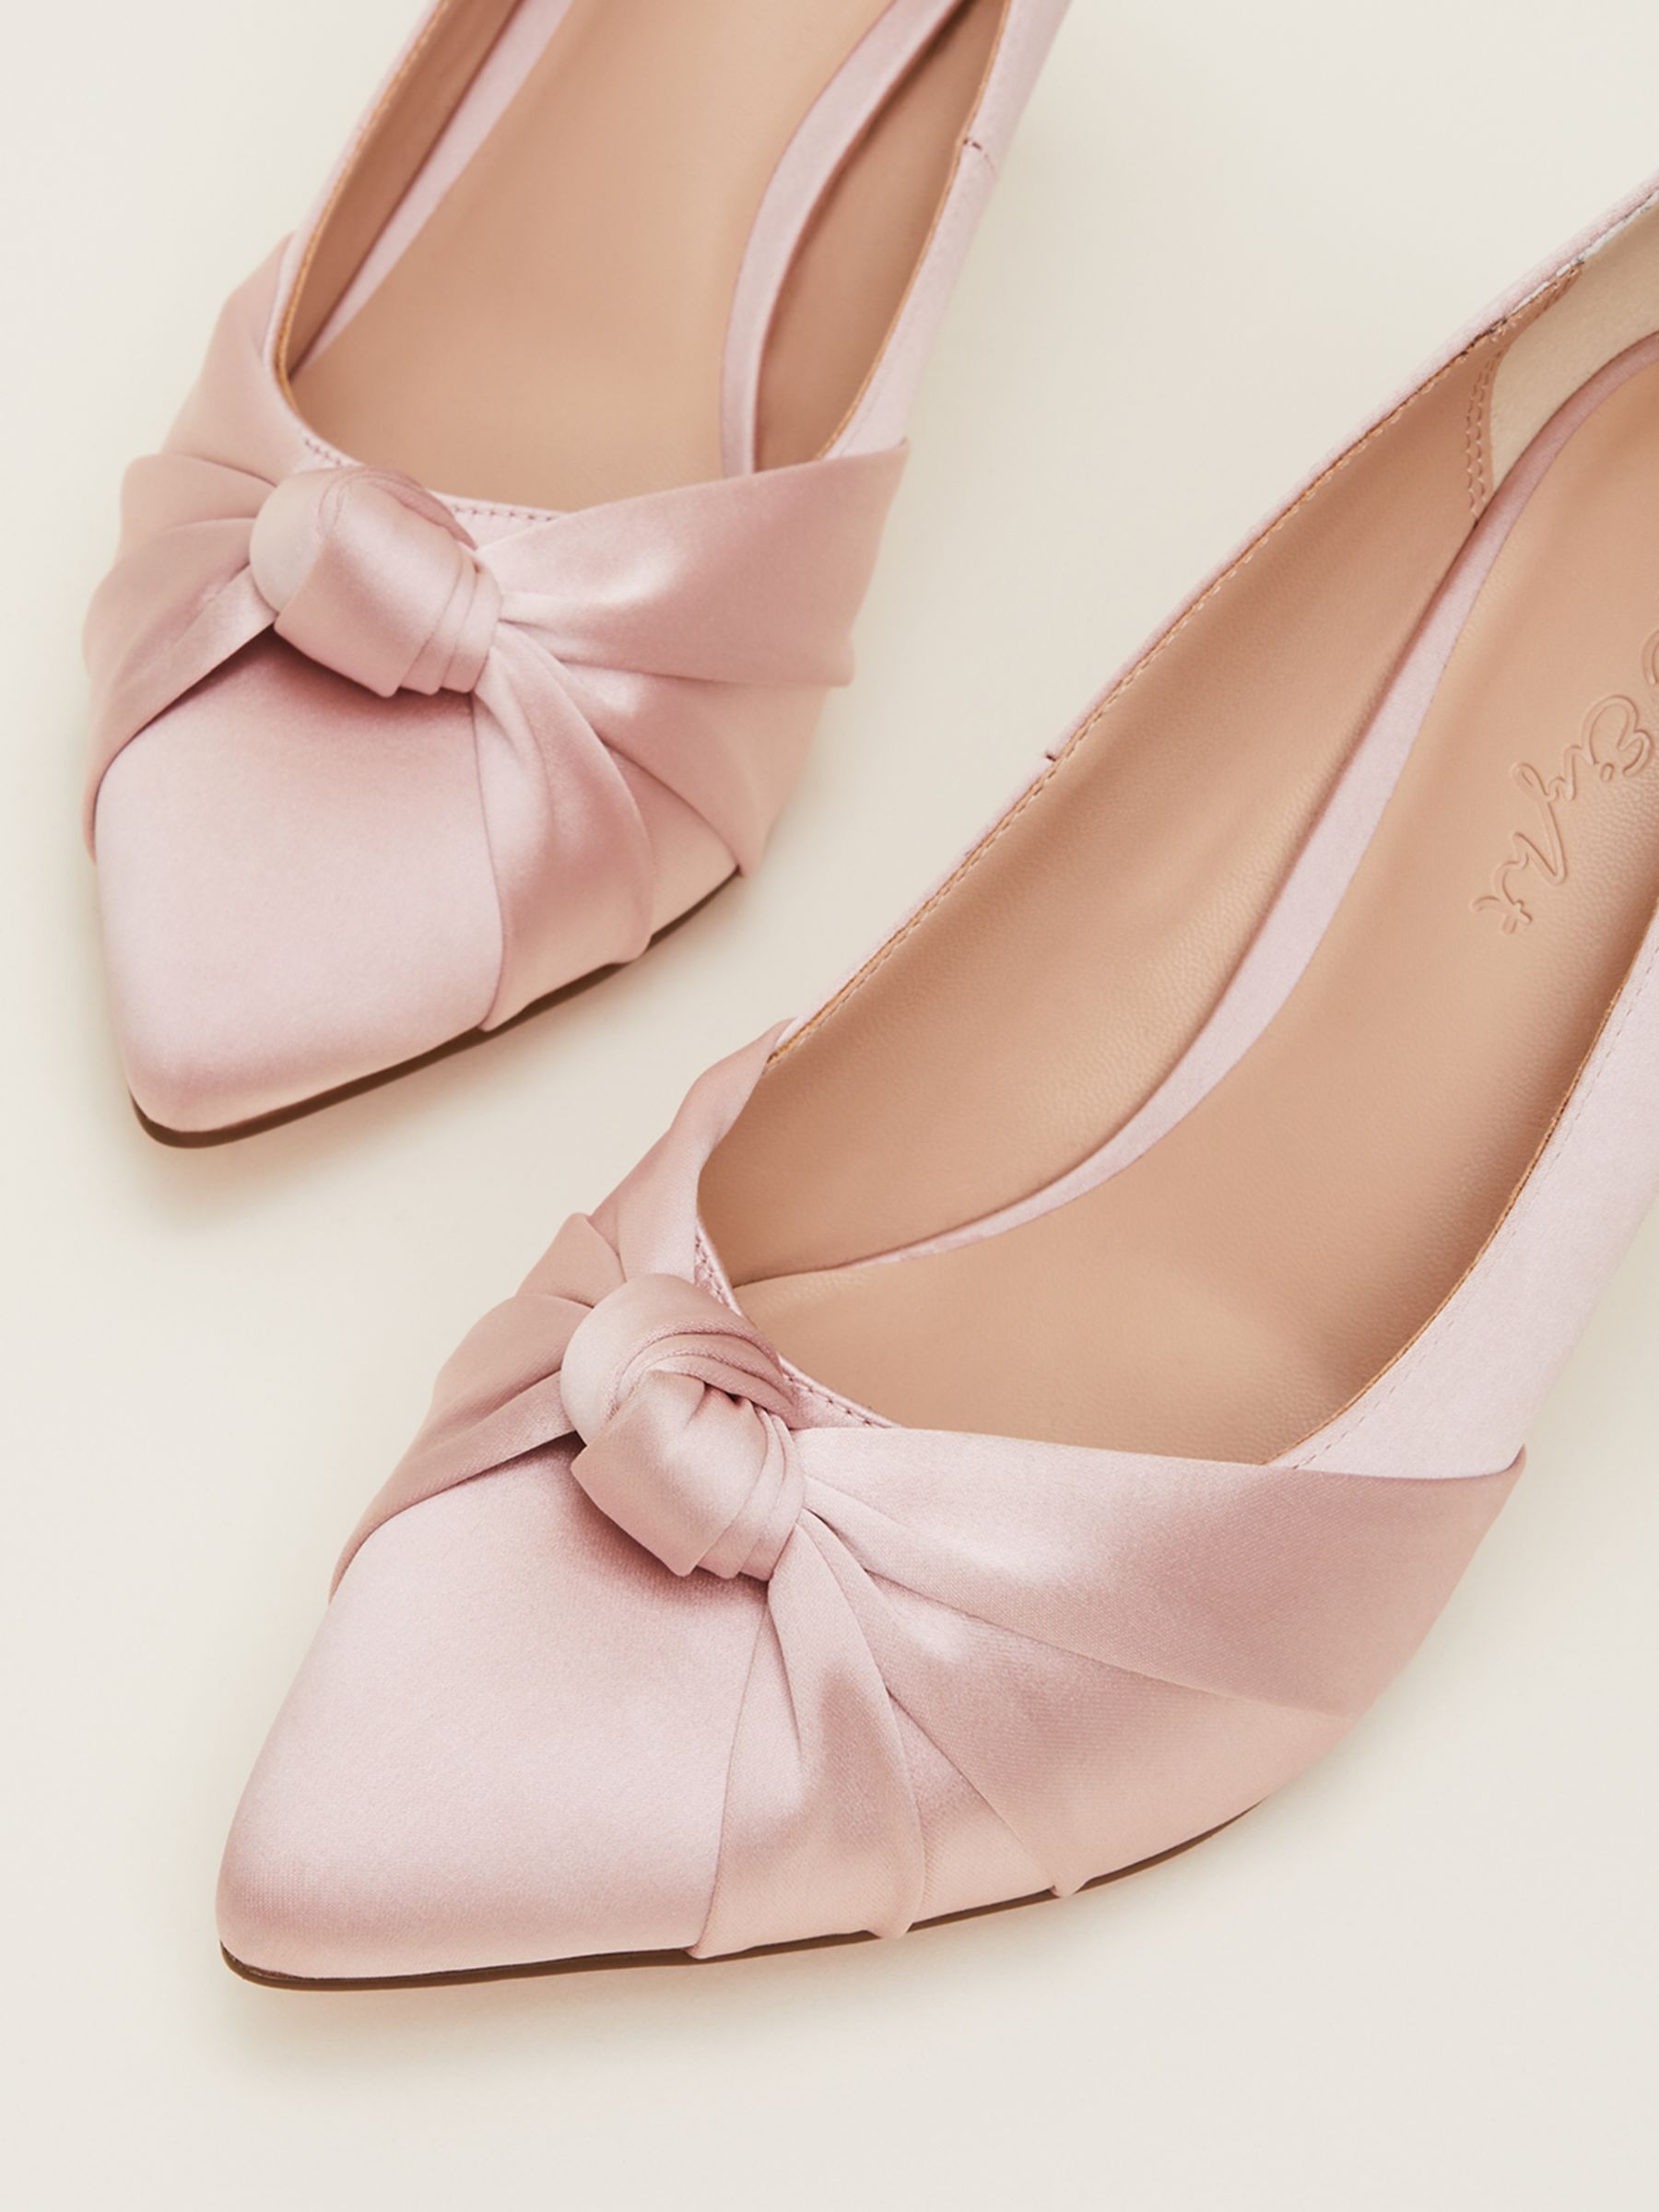 Buy Phase Eight Satin Knot Front Court Shoes Online at johnlewis.com